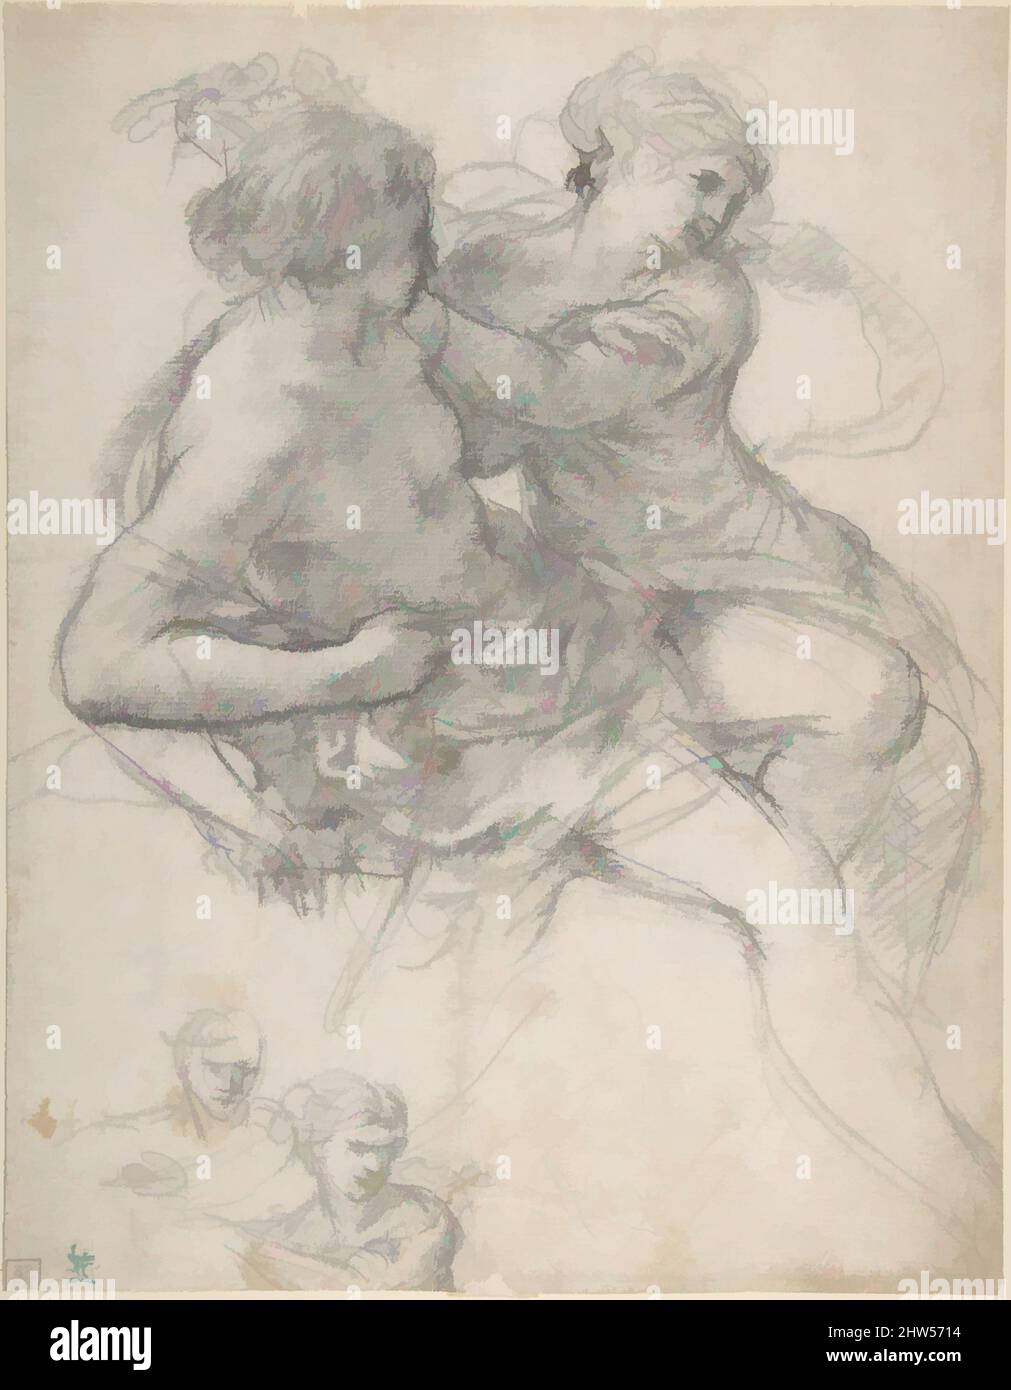 Art inspired by Study of Two Figures for the Age of Gold, 1637, Black chalk, slightly reworked by the artist with the wet tip of the chalk stick, 12 11/16 x 9 3/4in. (32.3 x 24.7cm), Drawings, Pietro da Cortona (Pietro Berrettini) (Italian, Cortona 1596–1669 Rome), In June 1637, Pietro, Classic works modernized by Artotop with a splash of modernity. Shapes, color and value, eye-catching visual impact on art. Emotions through freedom of artworks in a contemporary way. A timeless message pursuing a wildly creative new direction. Artists turning to the digital medium and creating the Artotop NFT Stock Photo